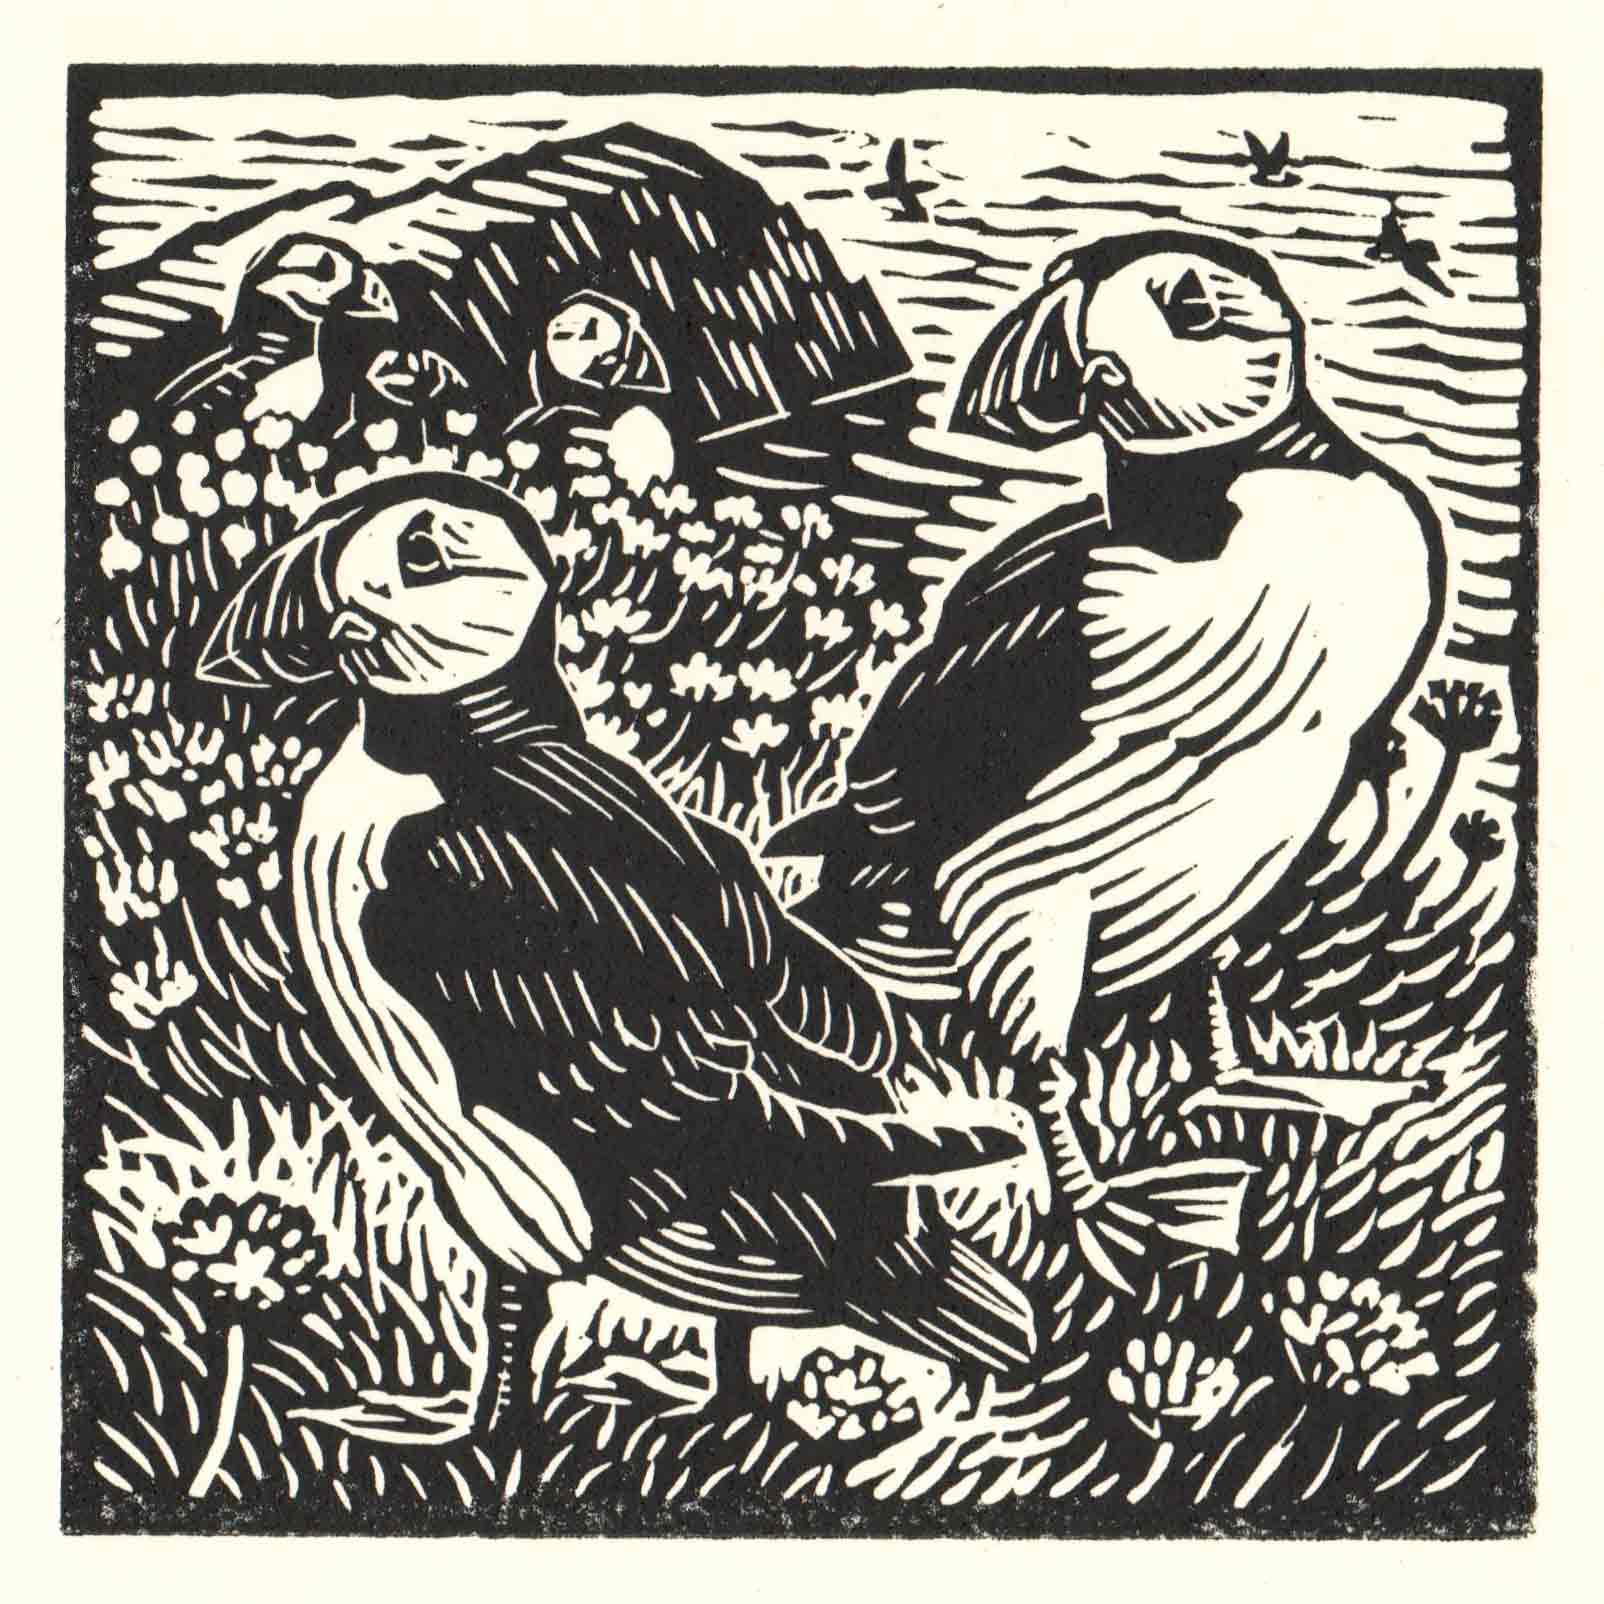 Art Greeting Card by Richard Allen, Puffin, Linocut, Two puffins on a cliff